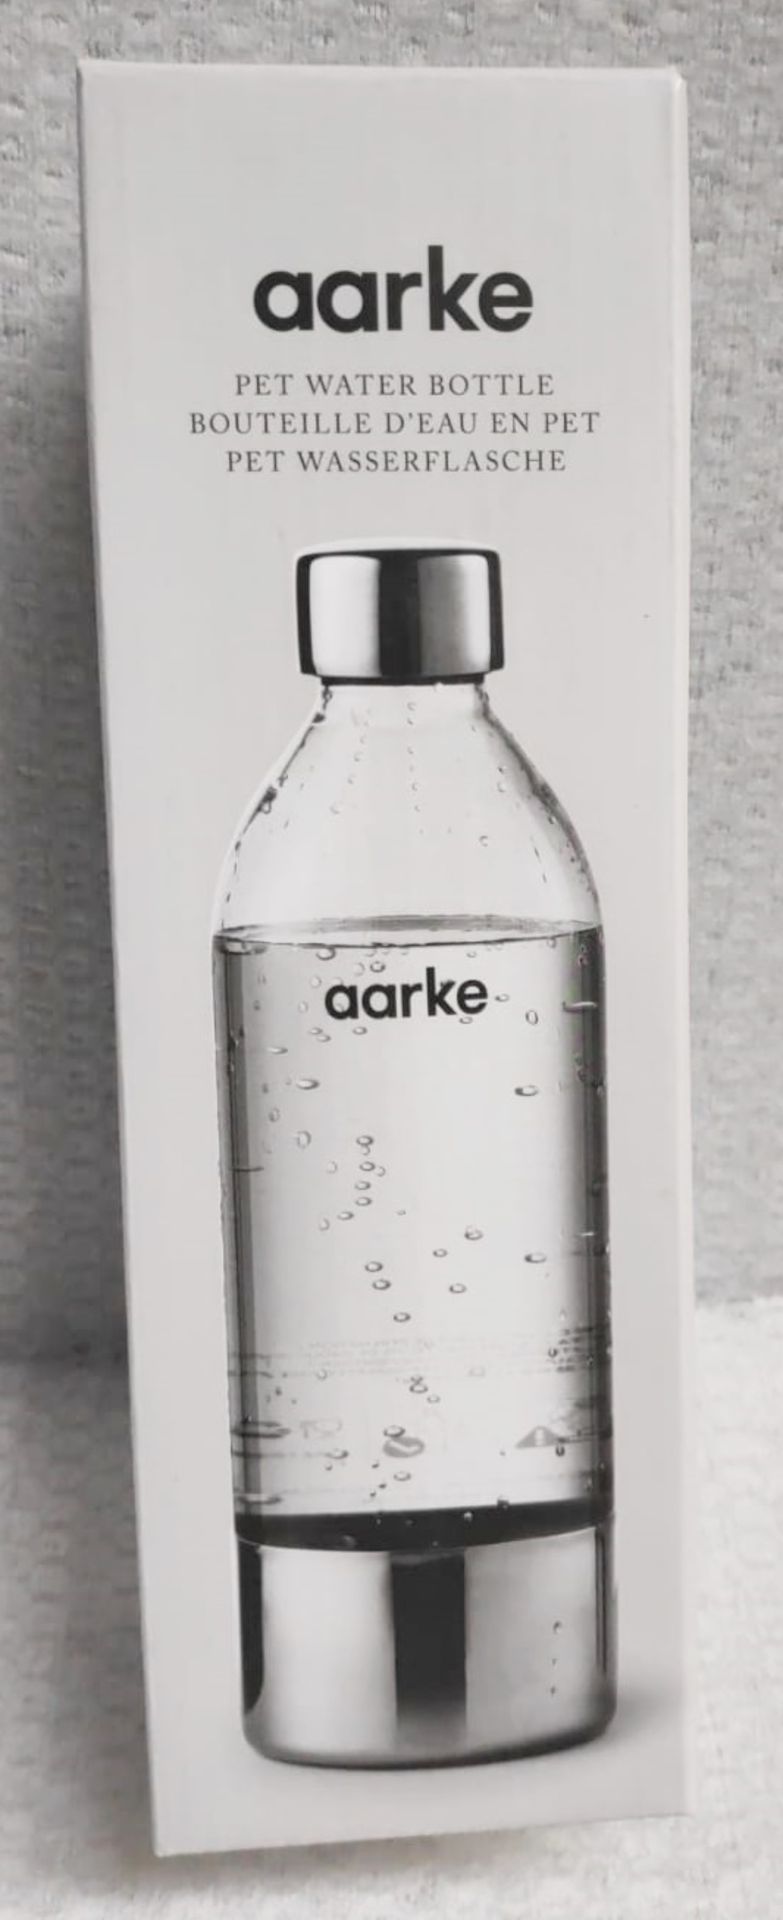 2 x AARKE Carbonated Water Bottles - Unused Boxed Stock - Ref: HAS2366/WH2/C25/04-23 - CL987 -